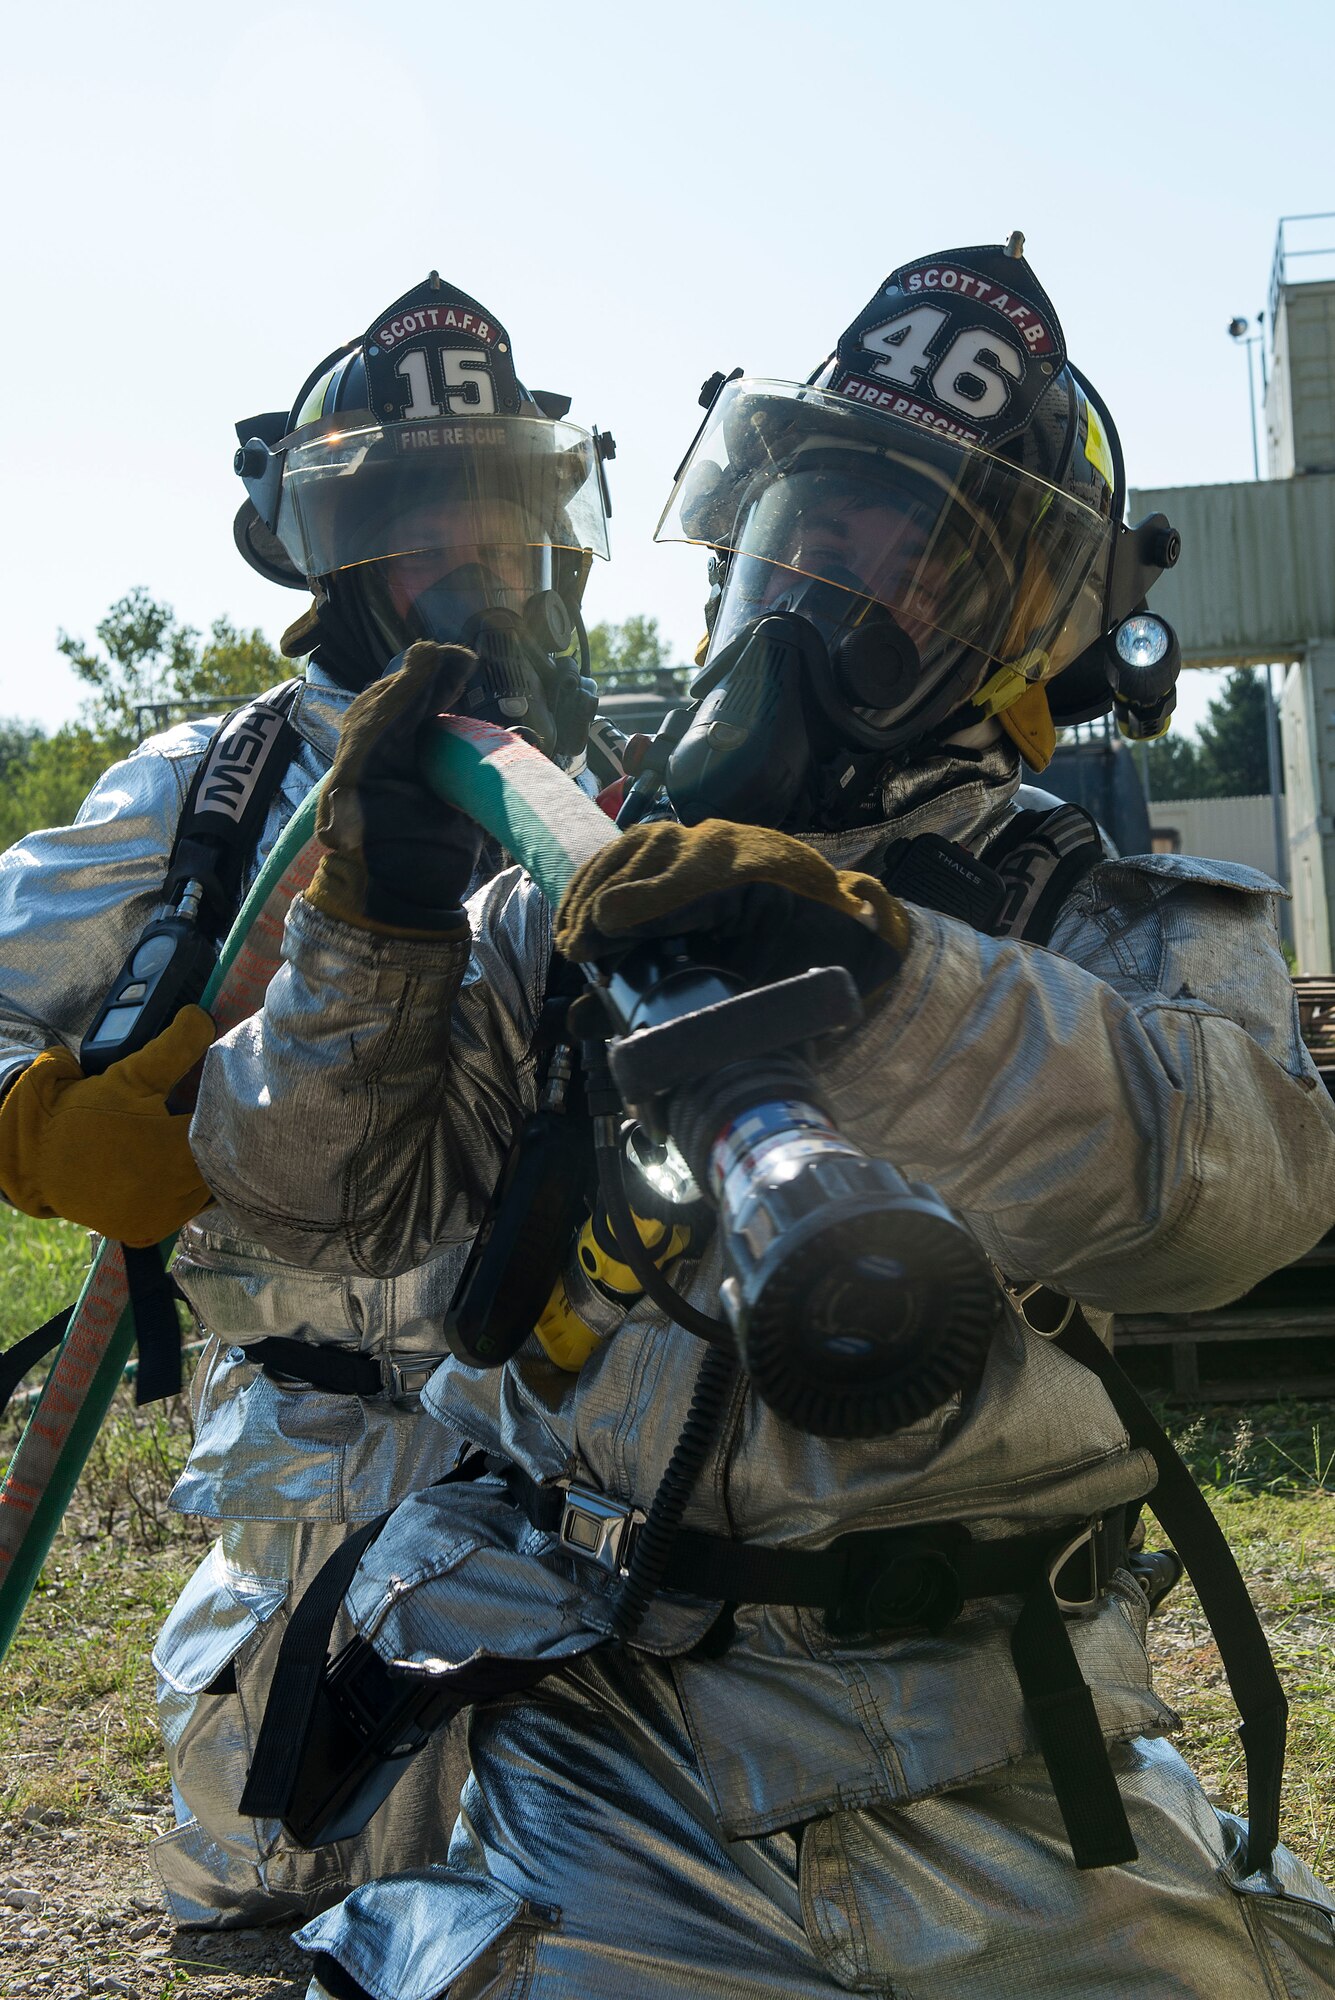 Firefighters with the 375th Civil Engineer Squadron prepare a hose while participating in an instructor credentialing course at Scott Air Force Base, Ill., Aug. 31, 2016. The three-day training program explored the most recent National Fire Protection Association standards and applied principles of the standards to the student’s ability to instruct live fire training in a safe environment. (U.S. Air Force photo/Tech. Sgt. Jonathan Fowler)